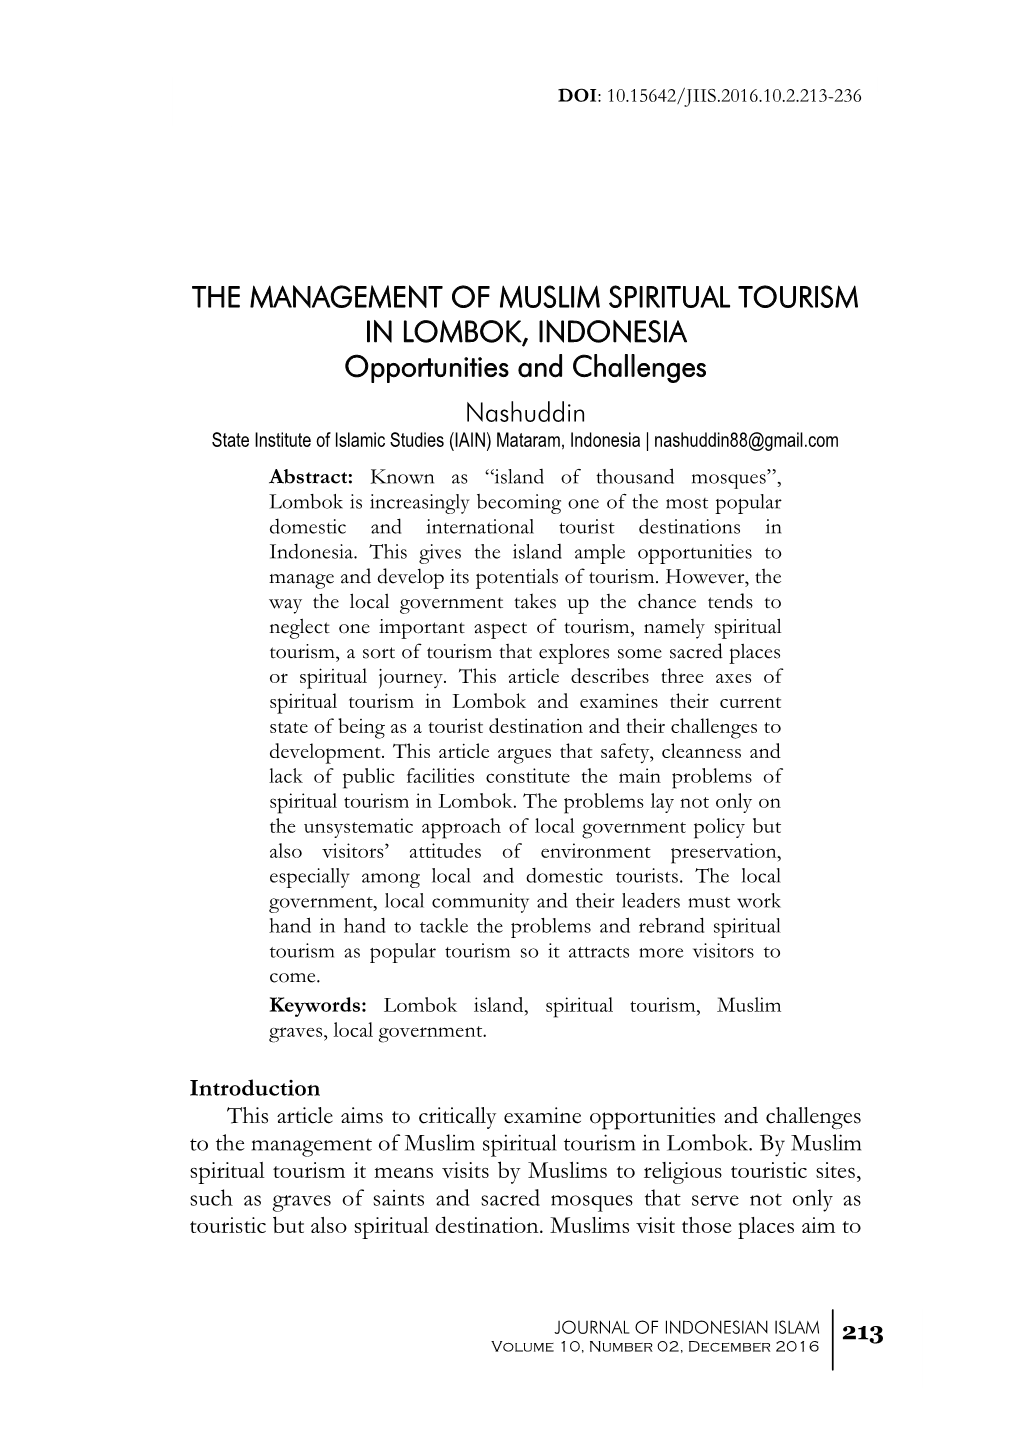 The Management of Muslim Spiritual Tourism in Lombok